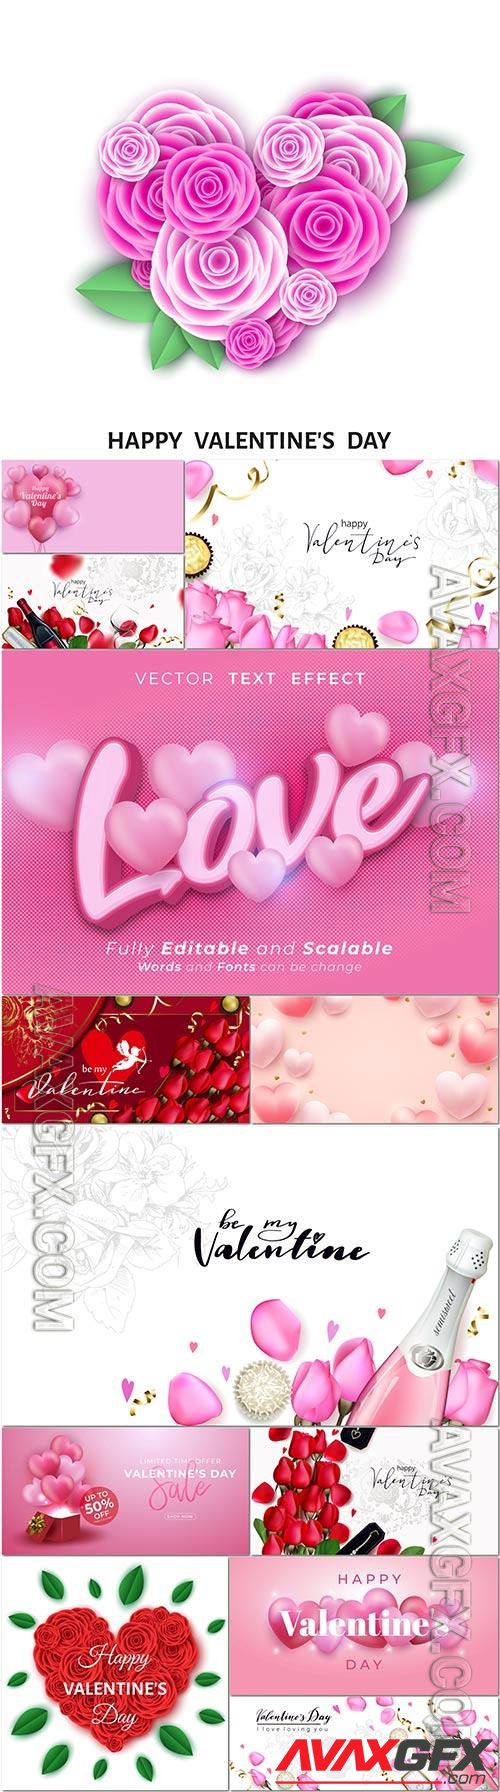 Romantic background with roses for valentine day in vector